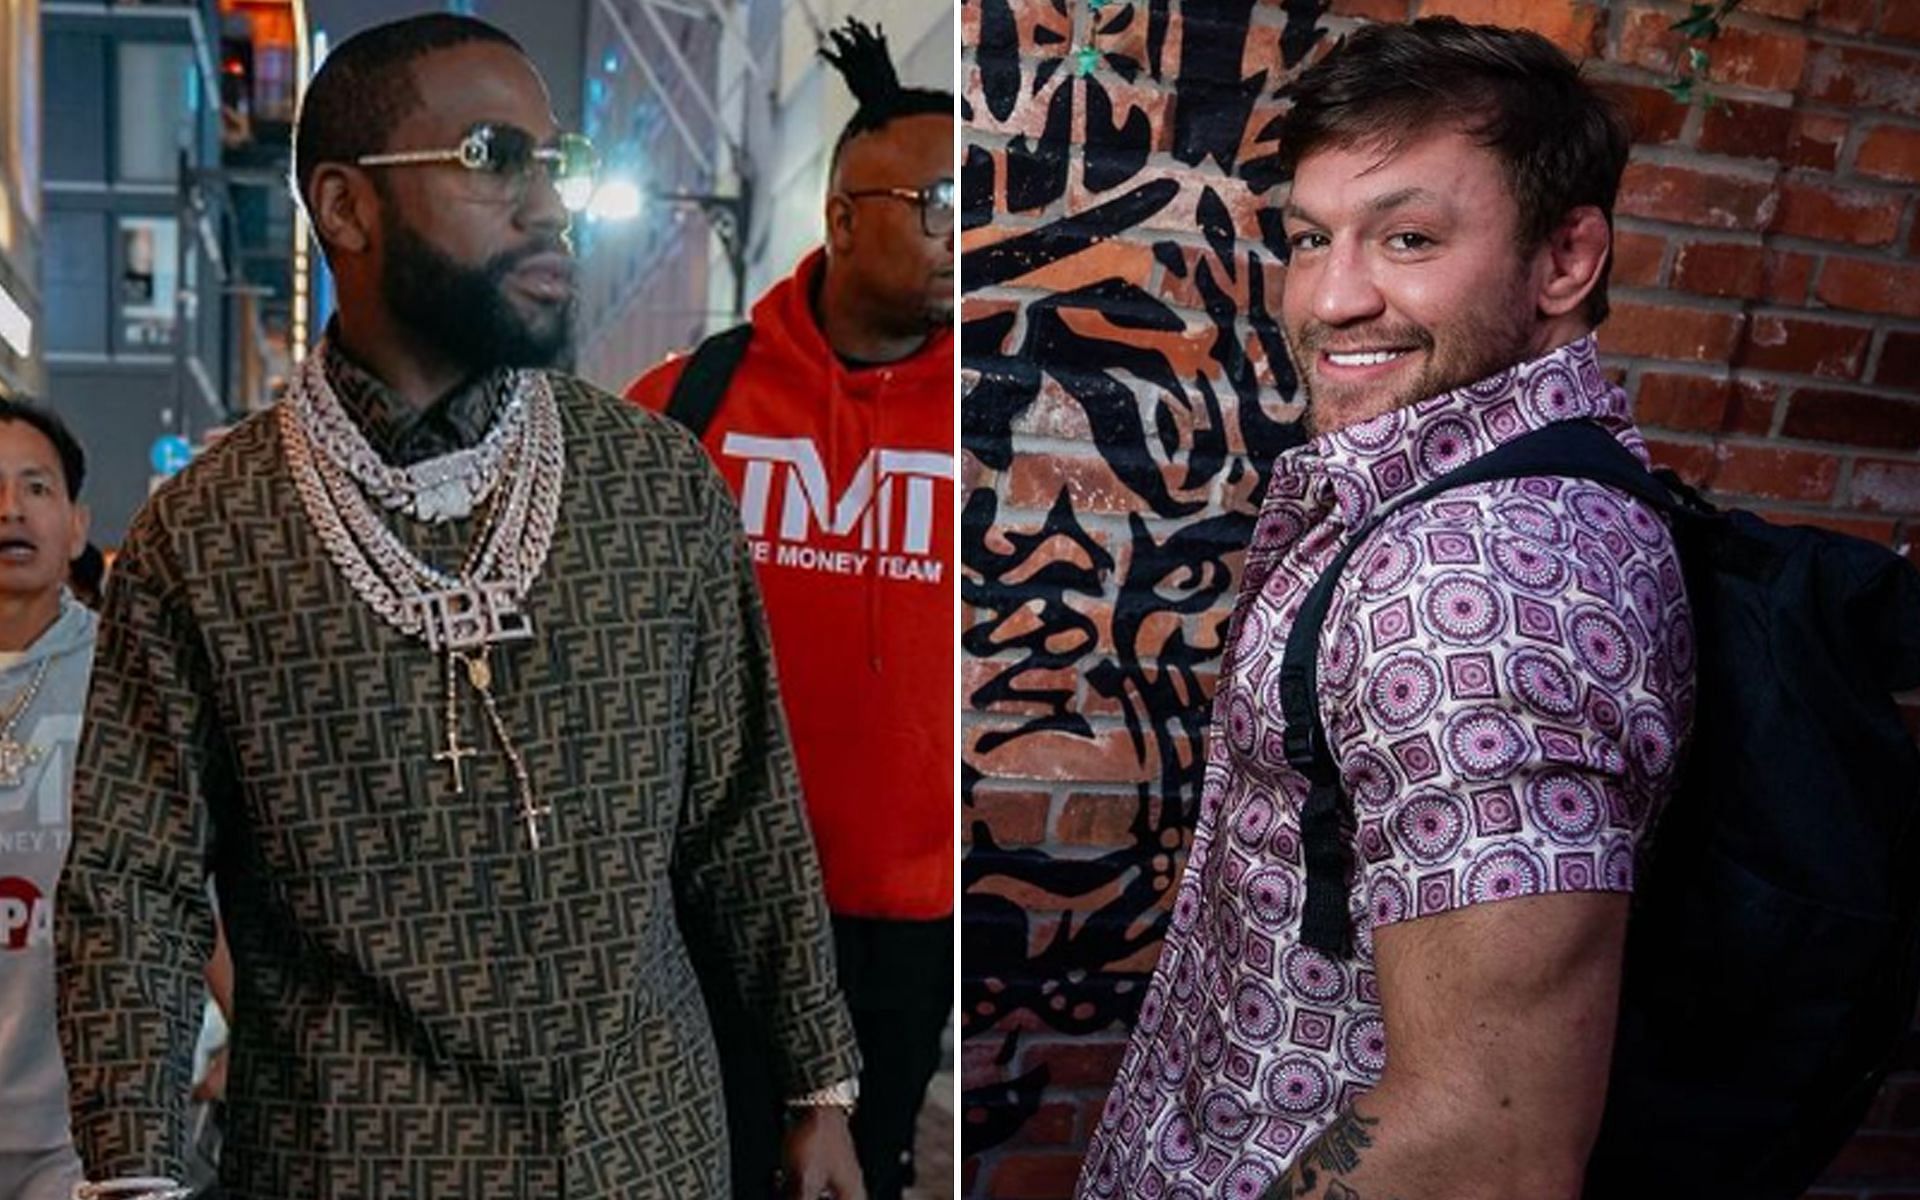 Floyd Mayweather [L] and Conor McGregor [R] [Images via @floydmayweather and @thenotoriousmma Instagram]